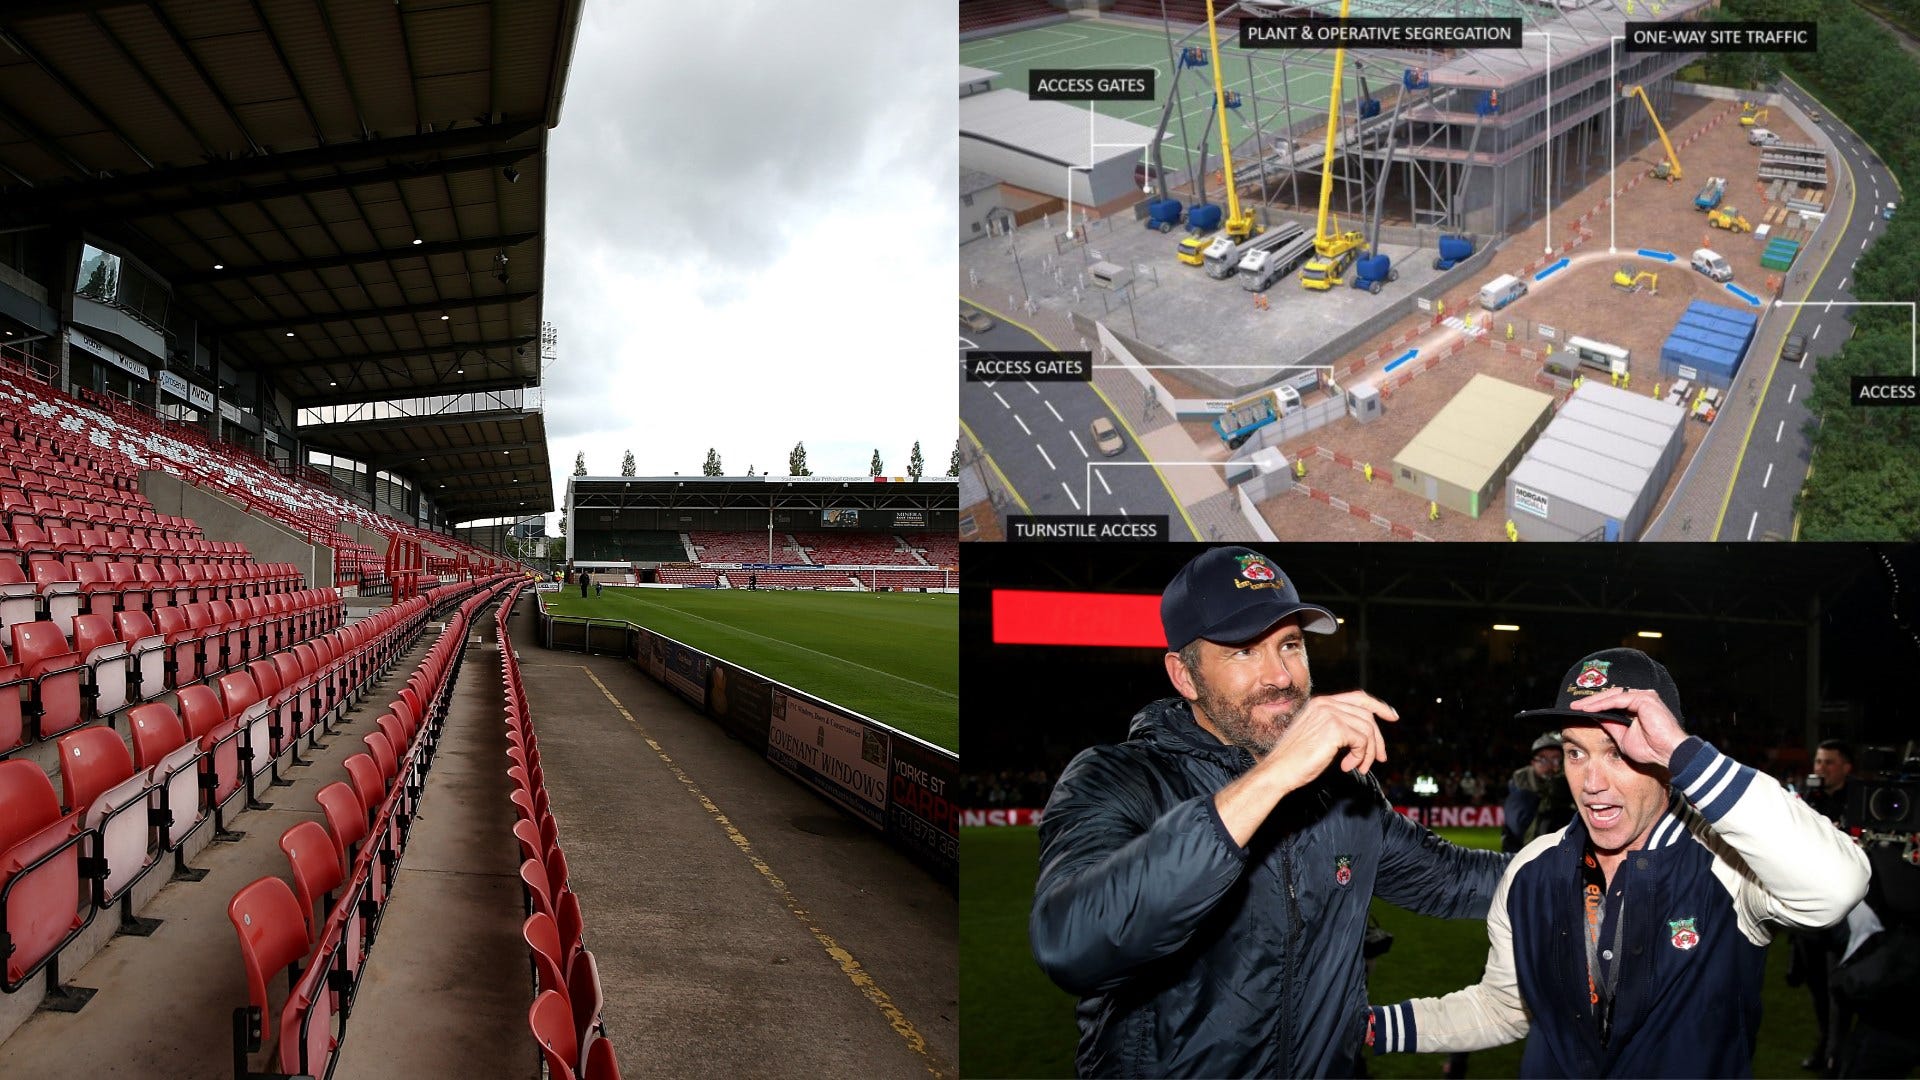 Work set to begin on Wrexham's new 5,500seater 'Kop' stand at the